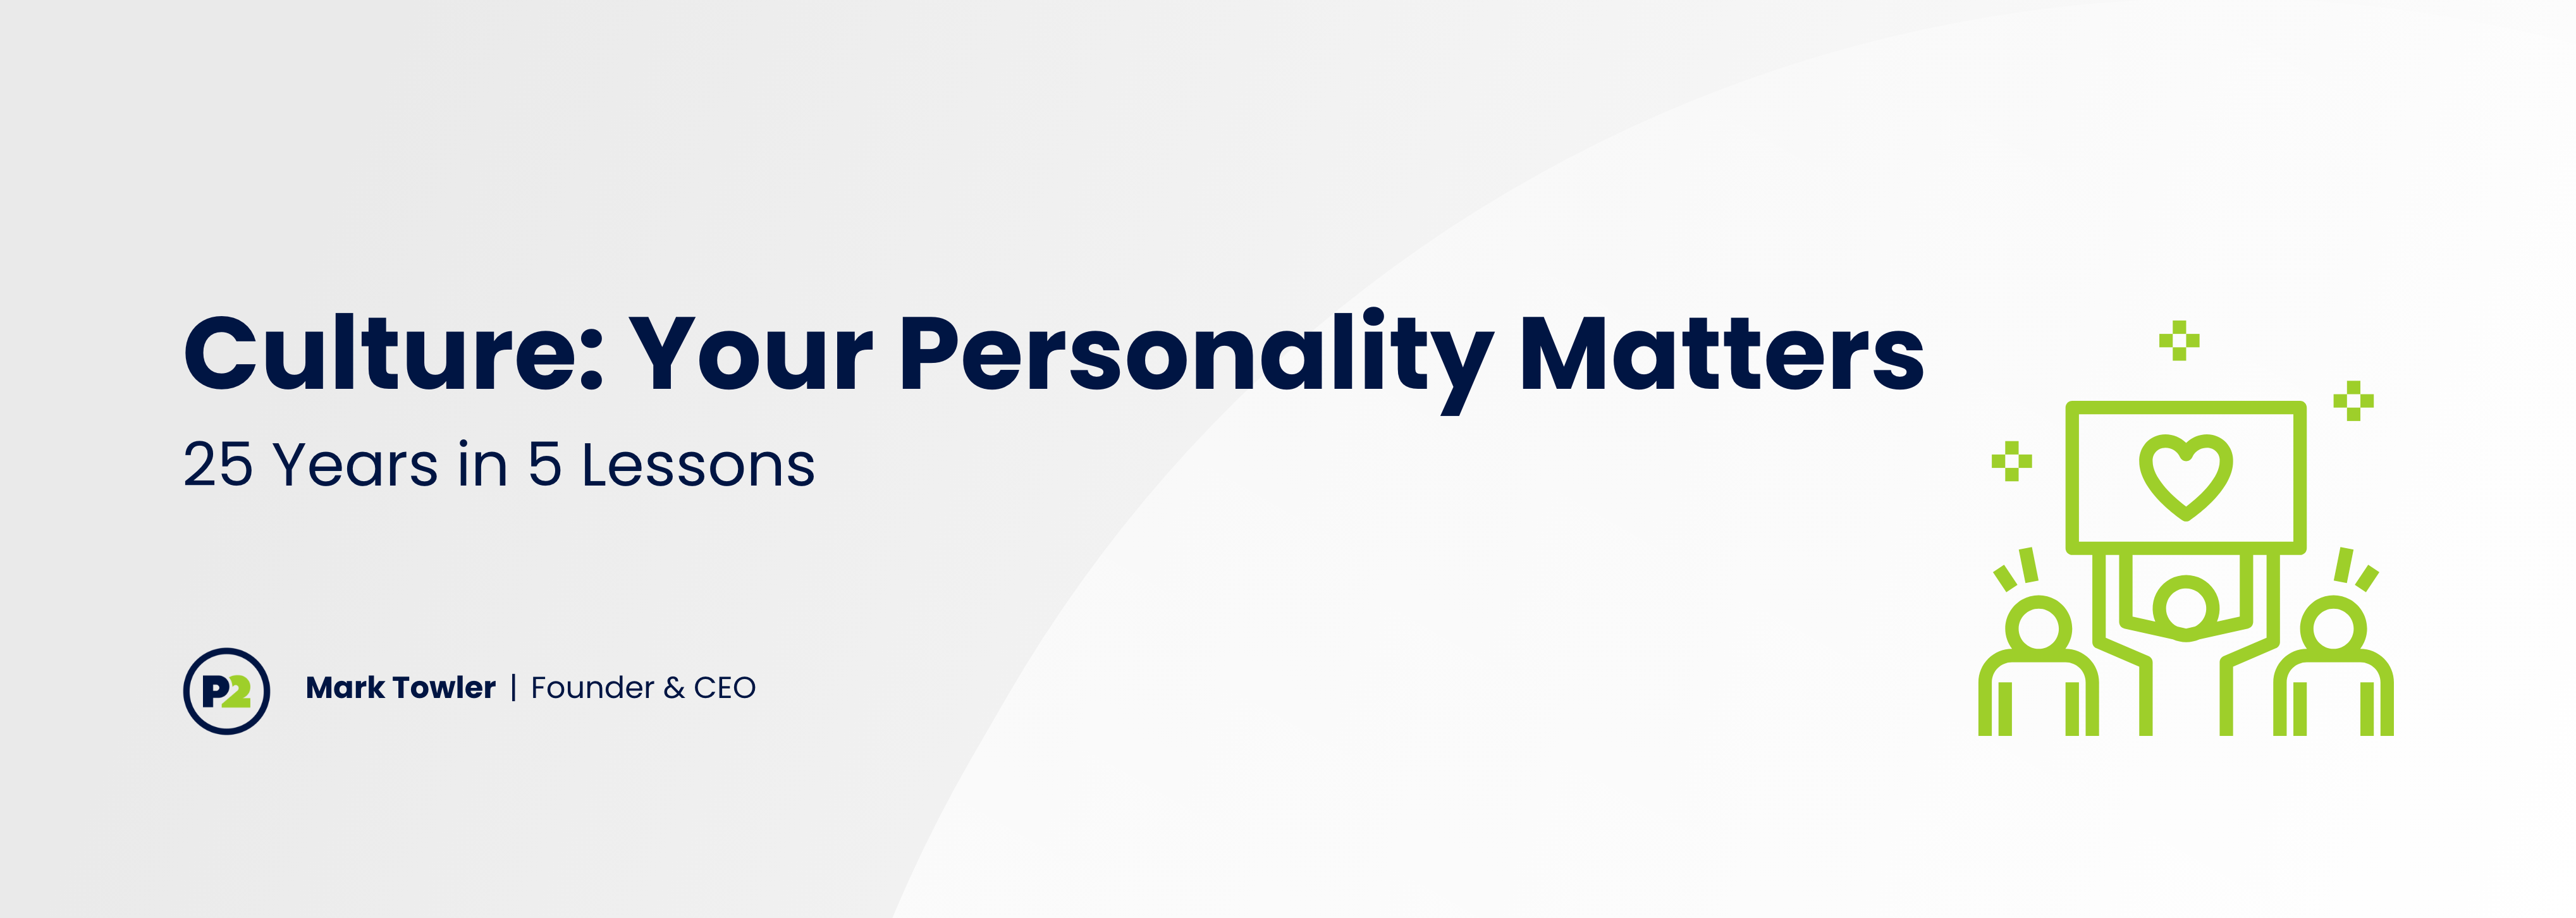 Culture: Your Personality Matters